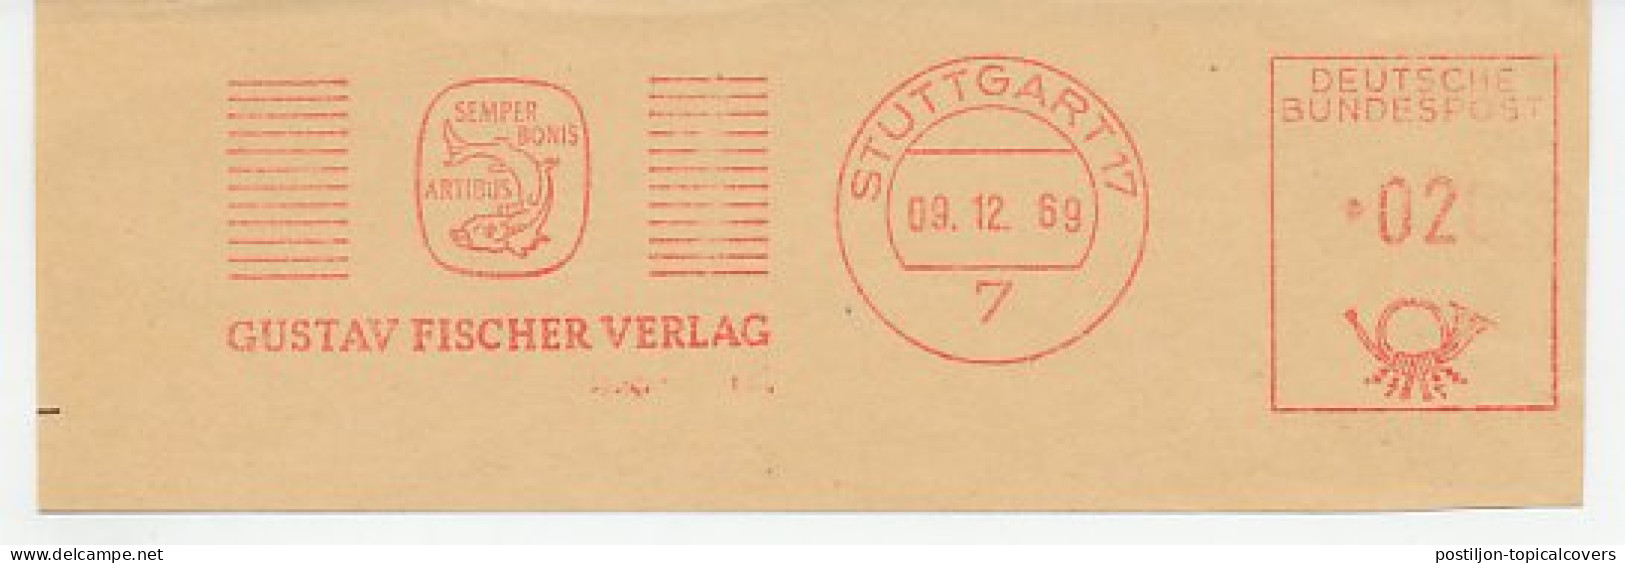 Meter Cut Germany 1969 Fish - Fishes